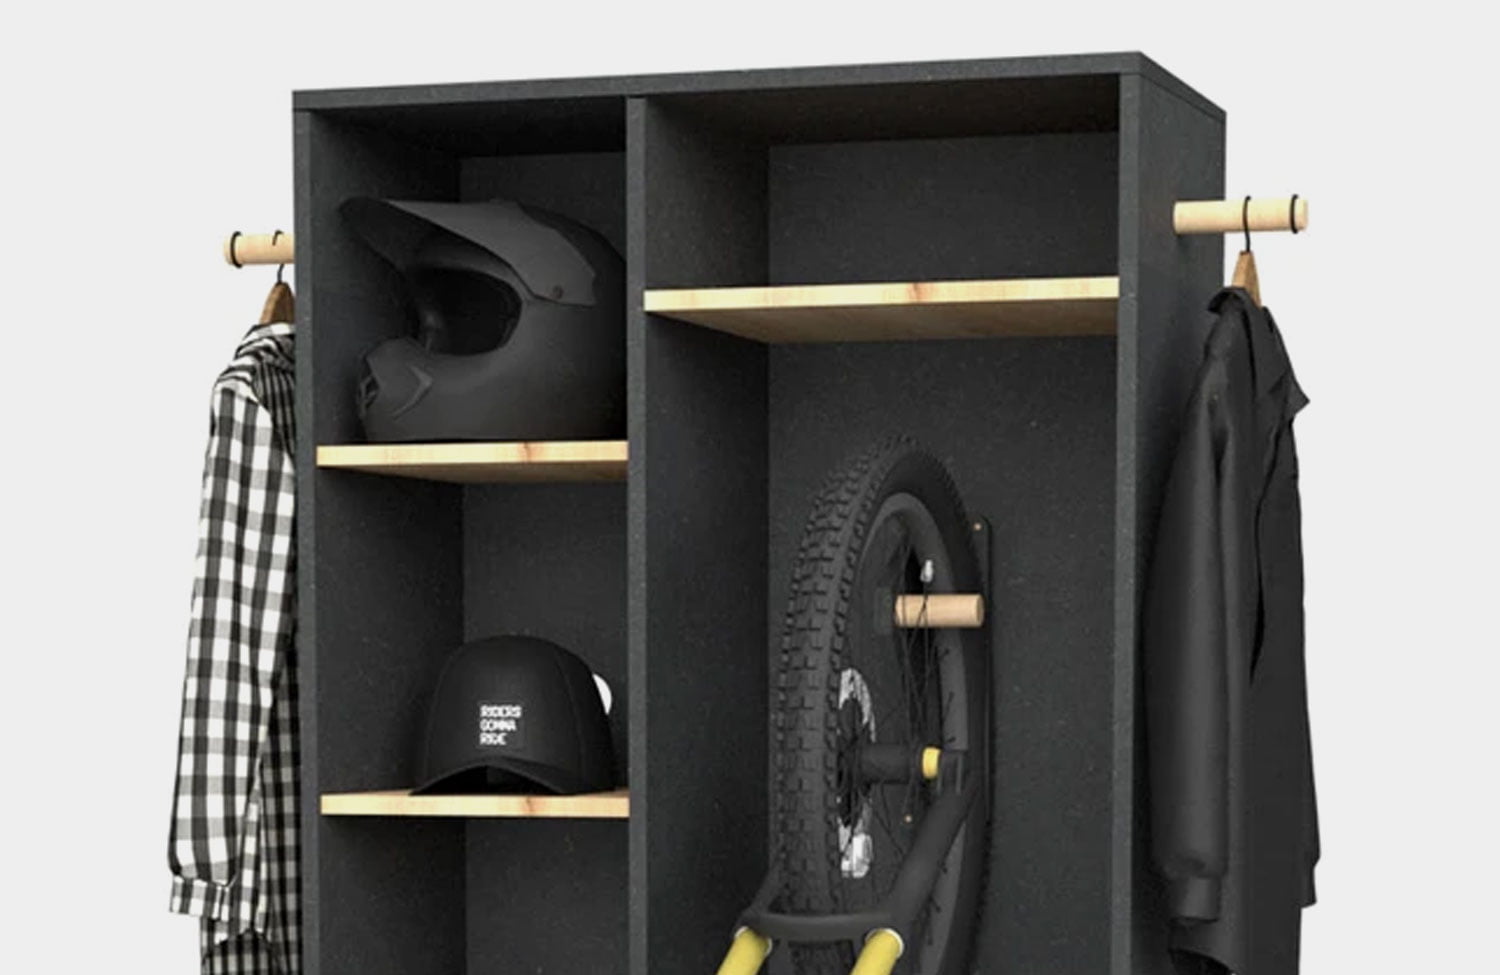 Flexible storage solutions for bikes from Riders Gonna Ride